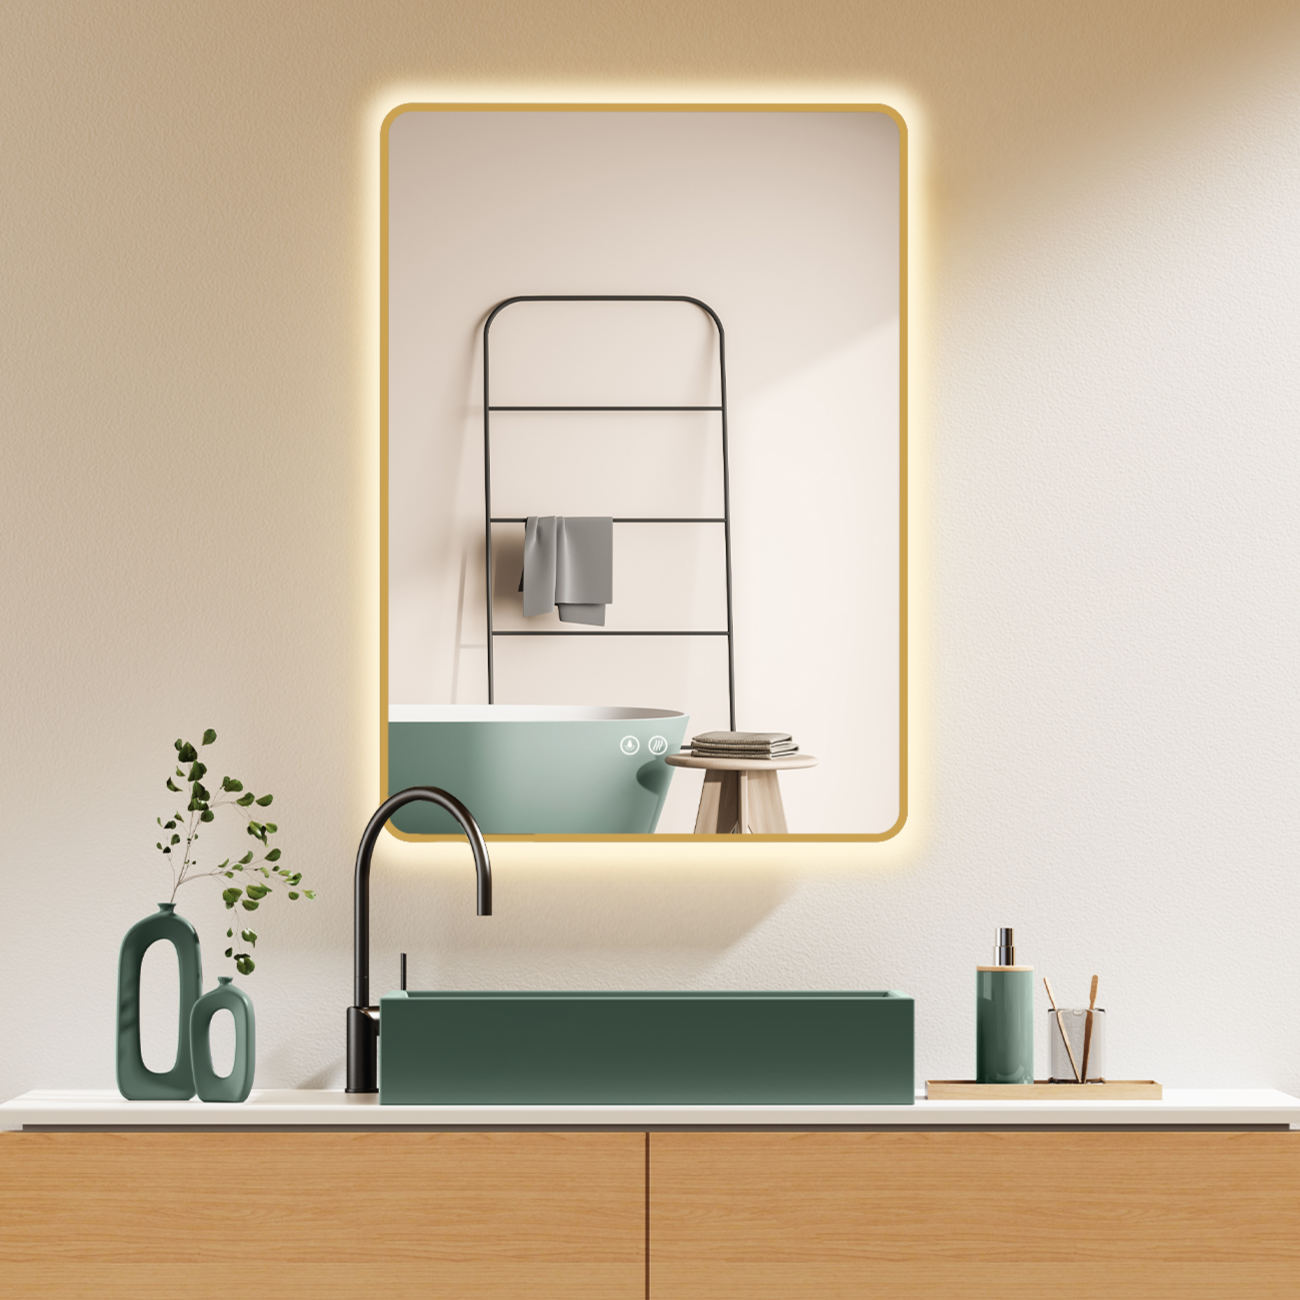 ANTI-FOG bathroom mirror with lighting with gold metal frame, light change